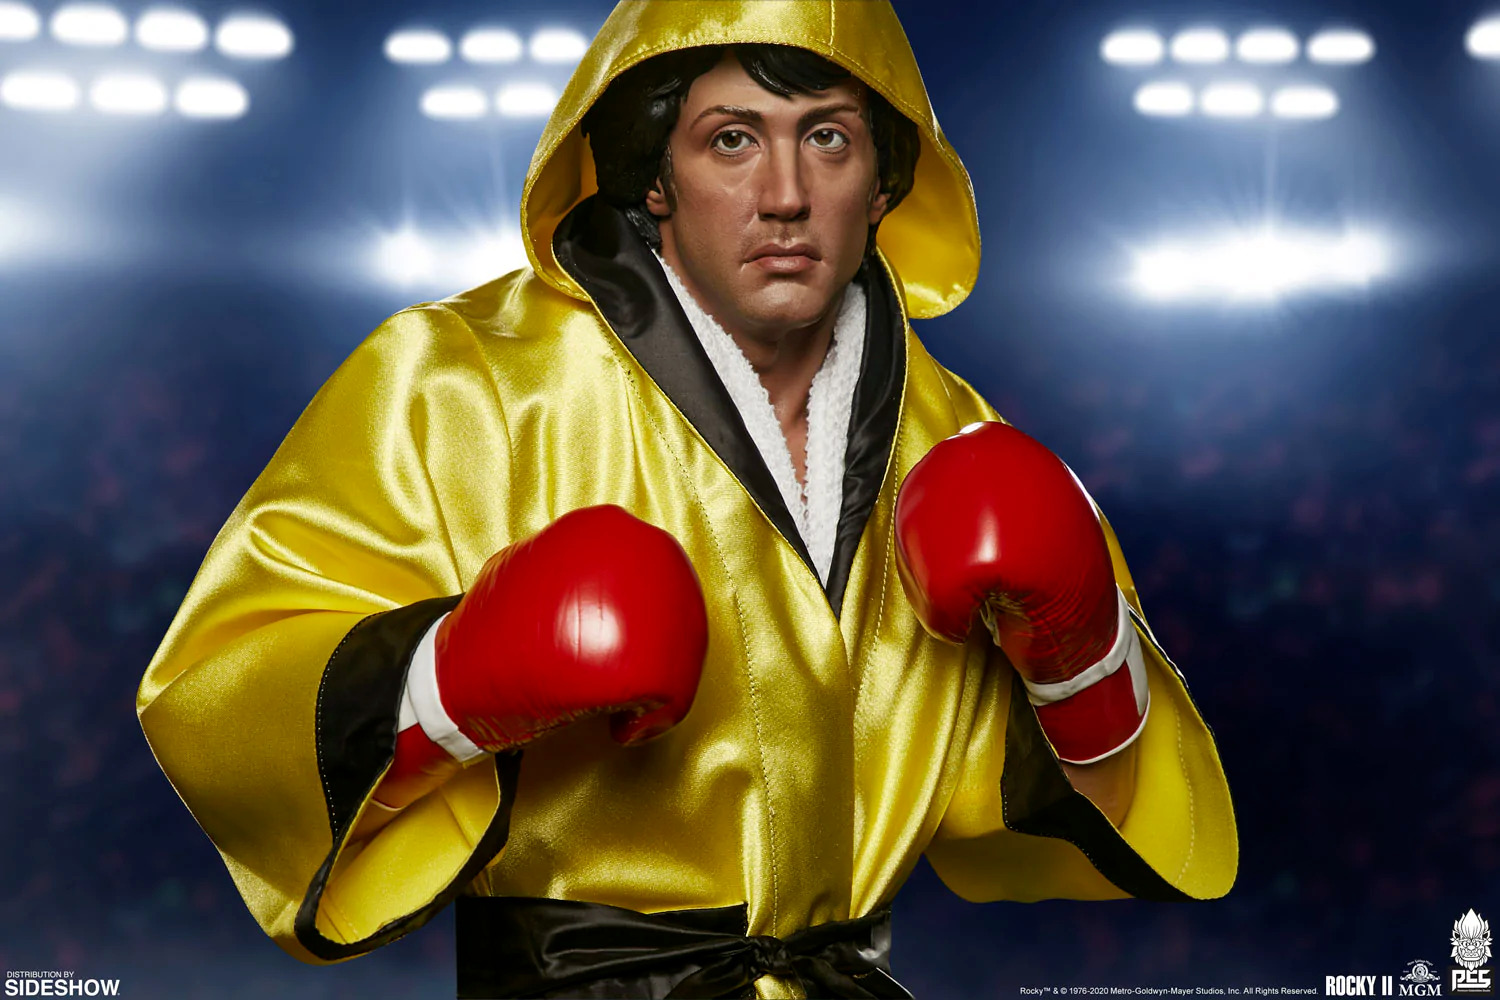 ROCKY 2 SYLVESTER STALLONE AS ROCKY BALBOA 1/3 SCALE STATUE BY PCS SIDESHOW